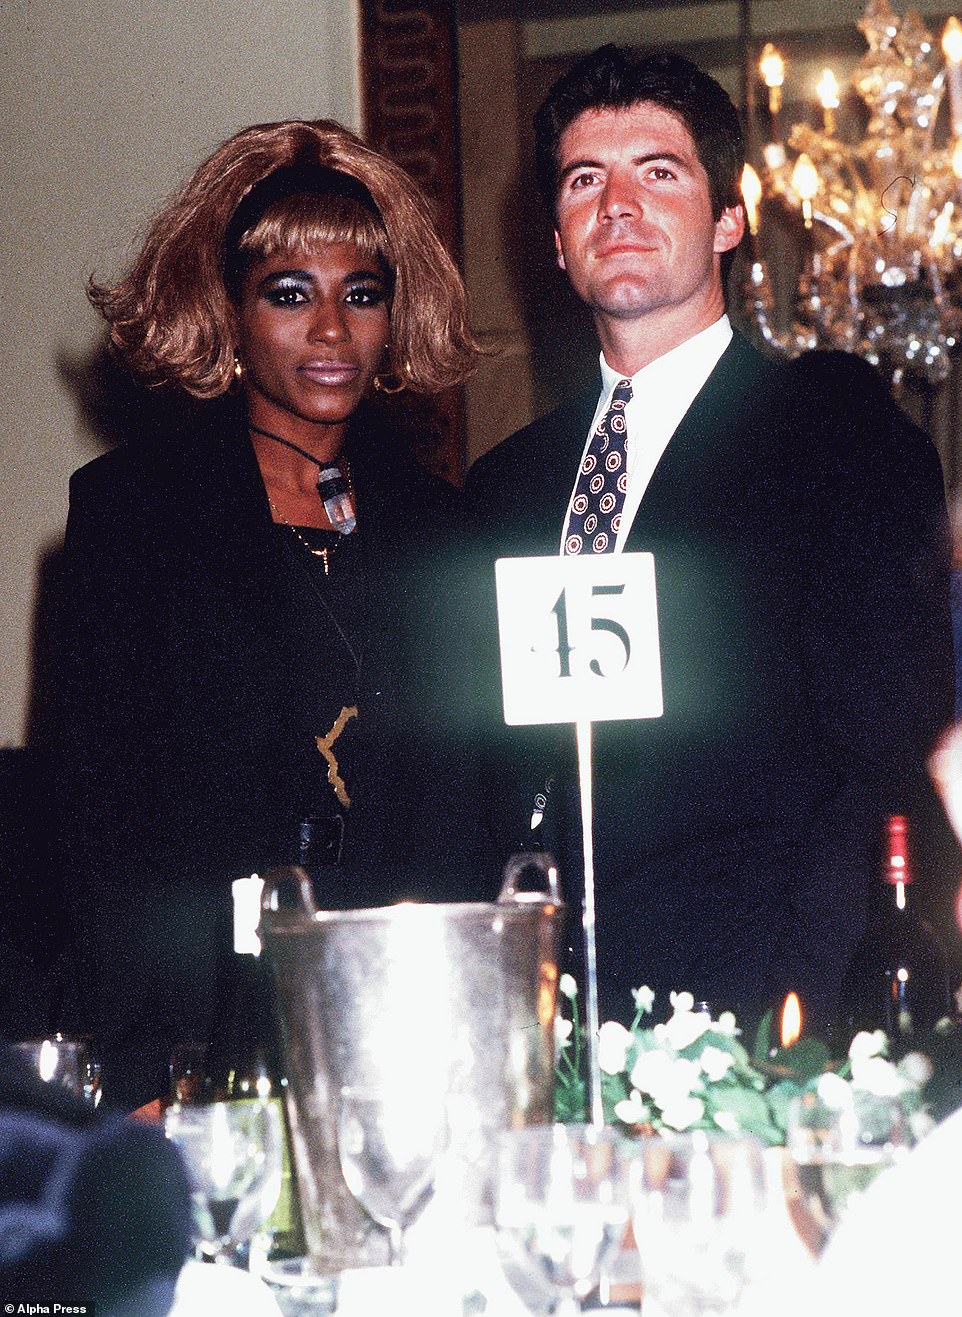 1990: Cowell looks handsome while posing with his then-girlfriend Sinitta, a constant in his life, at an event in London